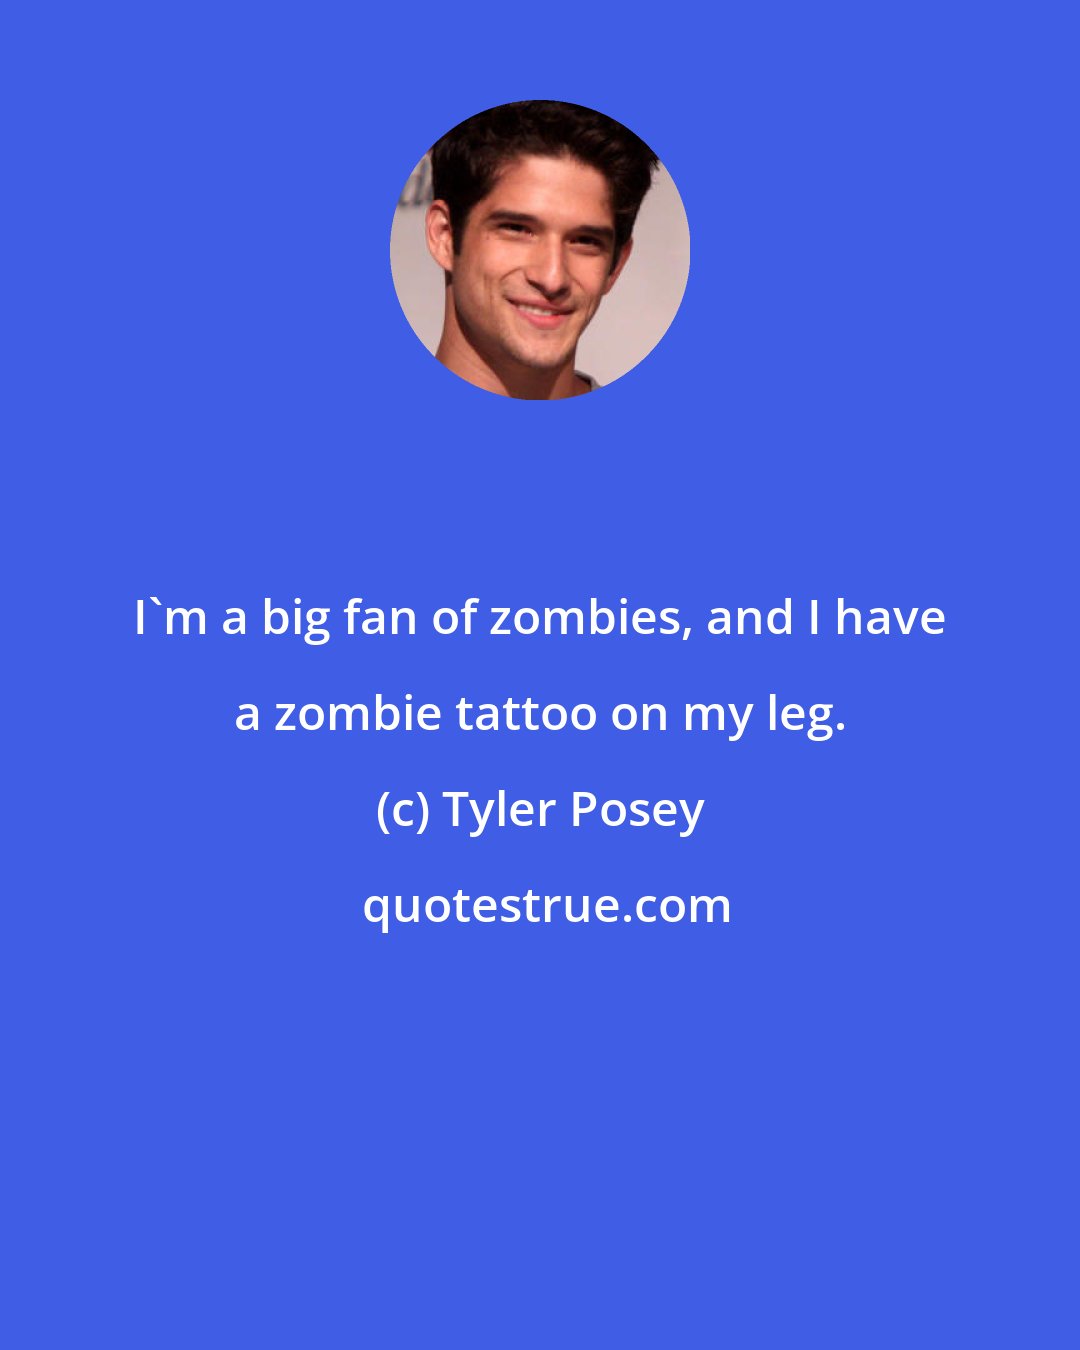 Tyler Posey: I'm a big fan of zombies, and I have a zombie tattoo on my leg.